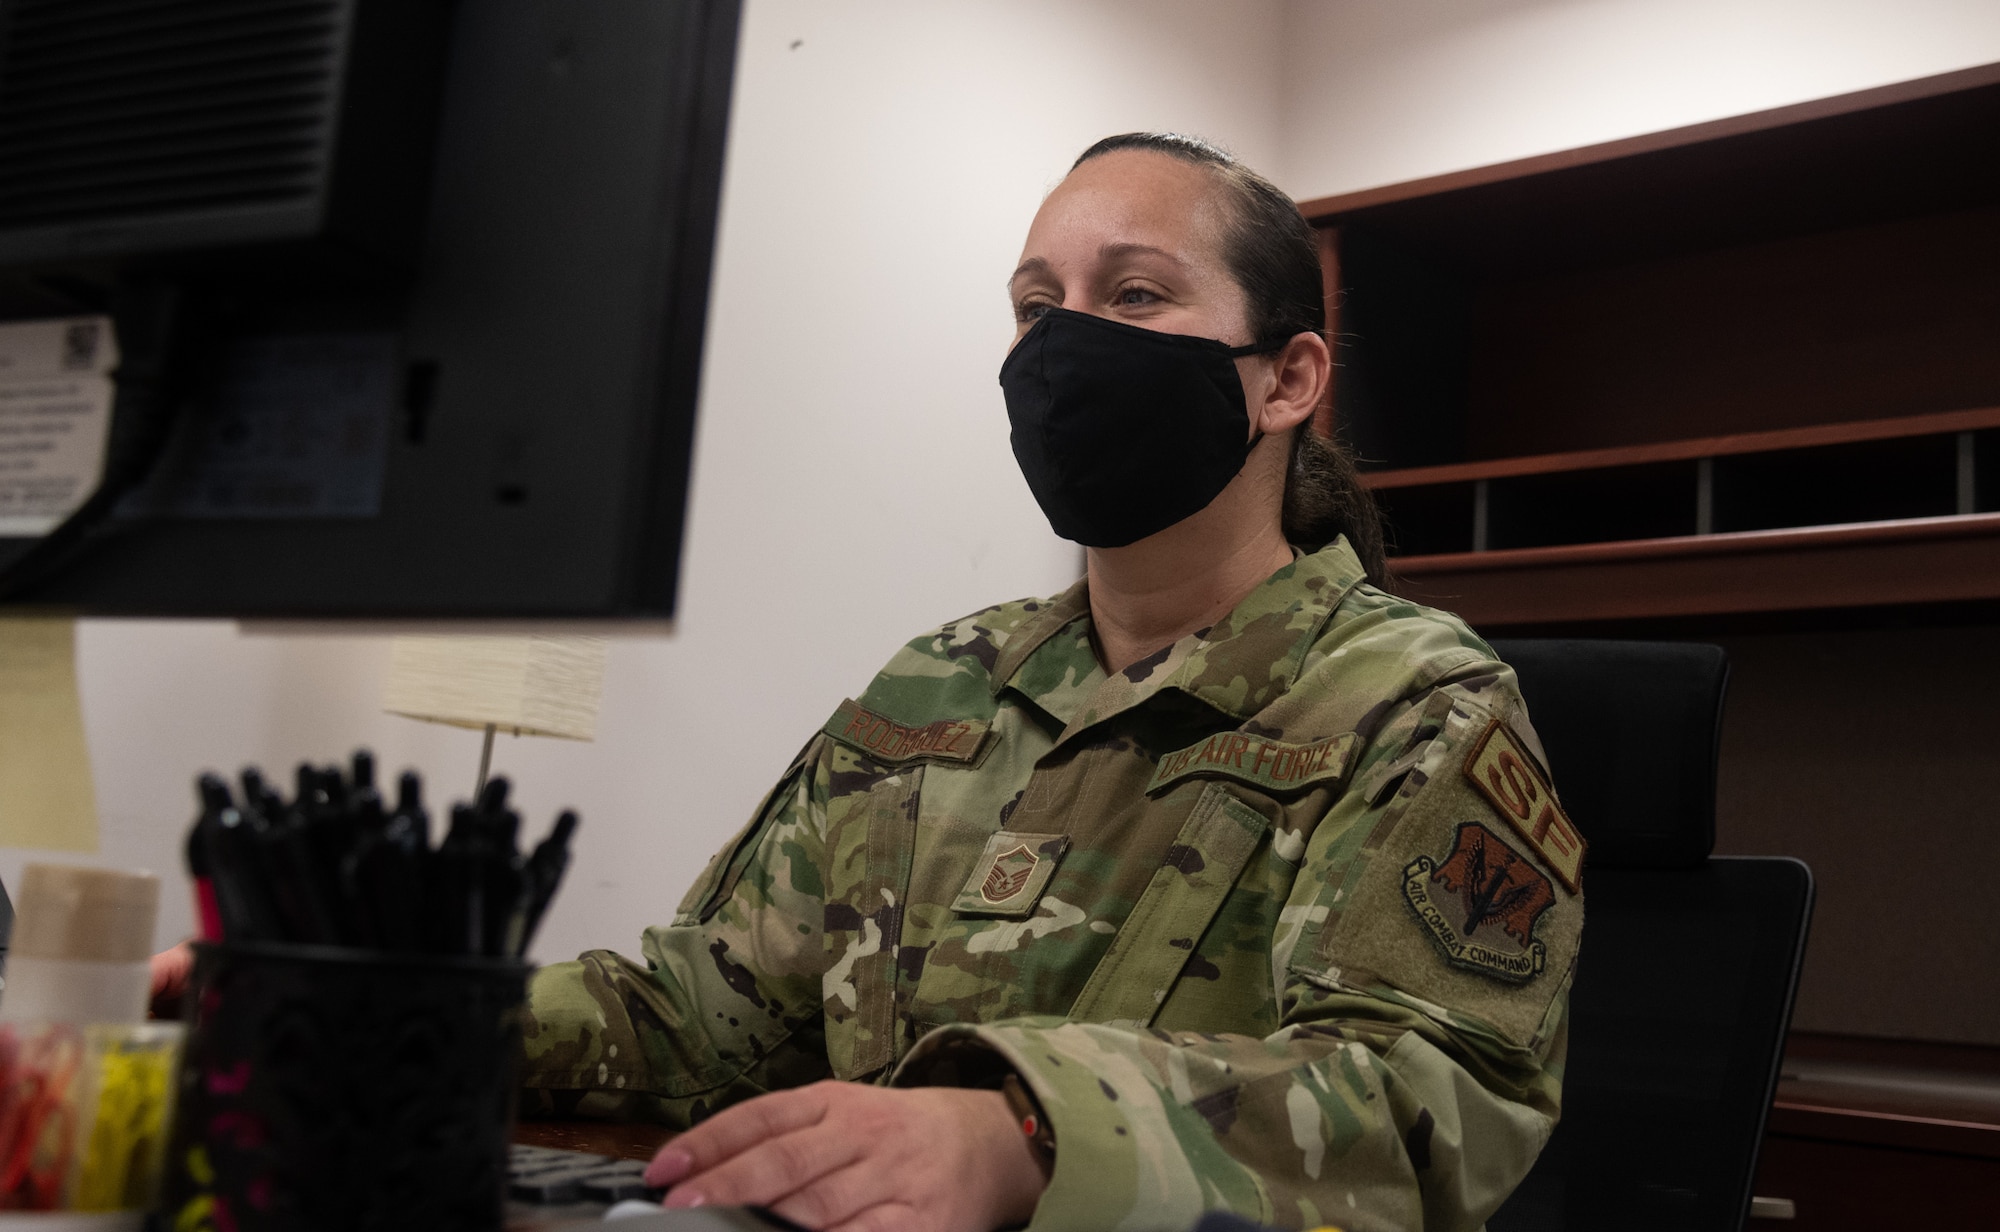 U.S. Air Force Master Sgt. Wanda Rodriguez, 175th Security Forces superintendent, sits at her desk in her office reviewing Air Force Instructions at Warfield Air National Guard Base at Martin State Airport, Middle River, Md., on March 5th, 2021.